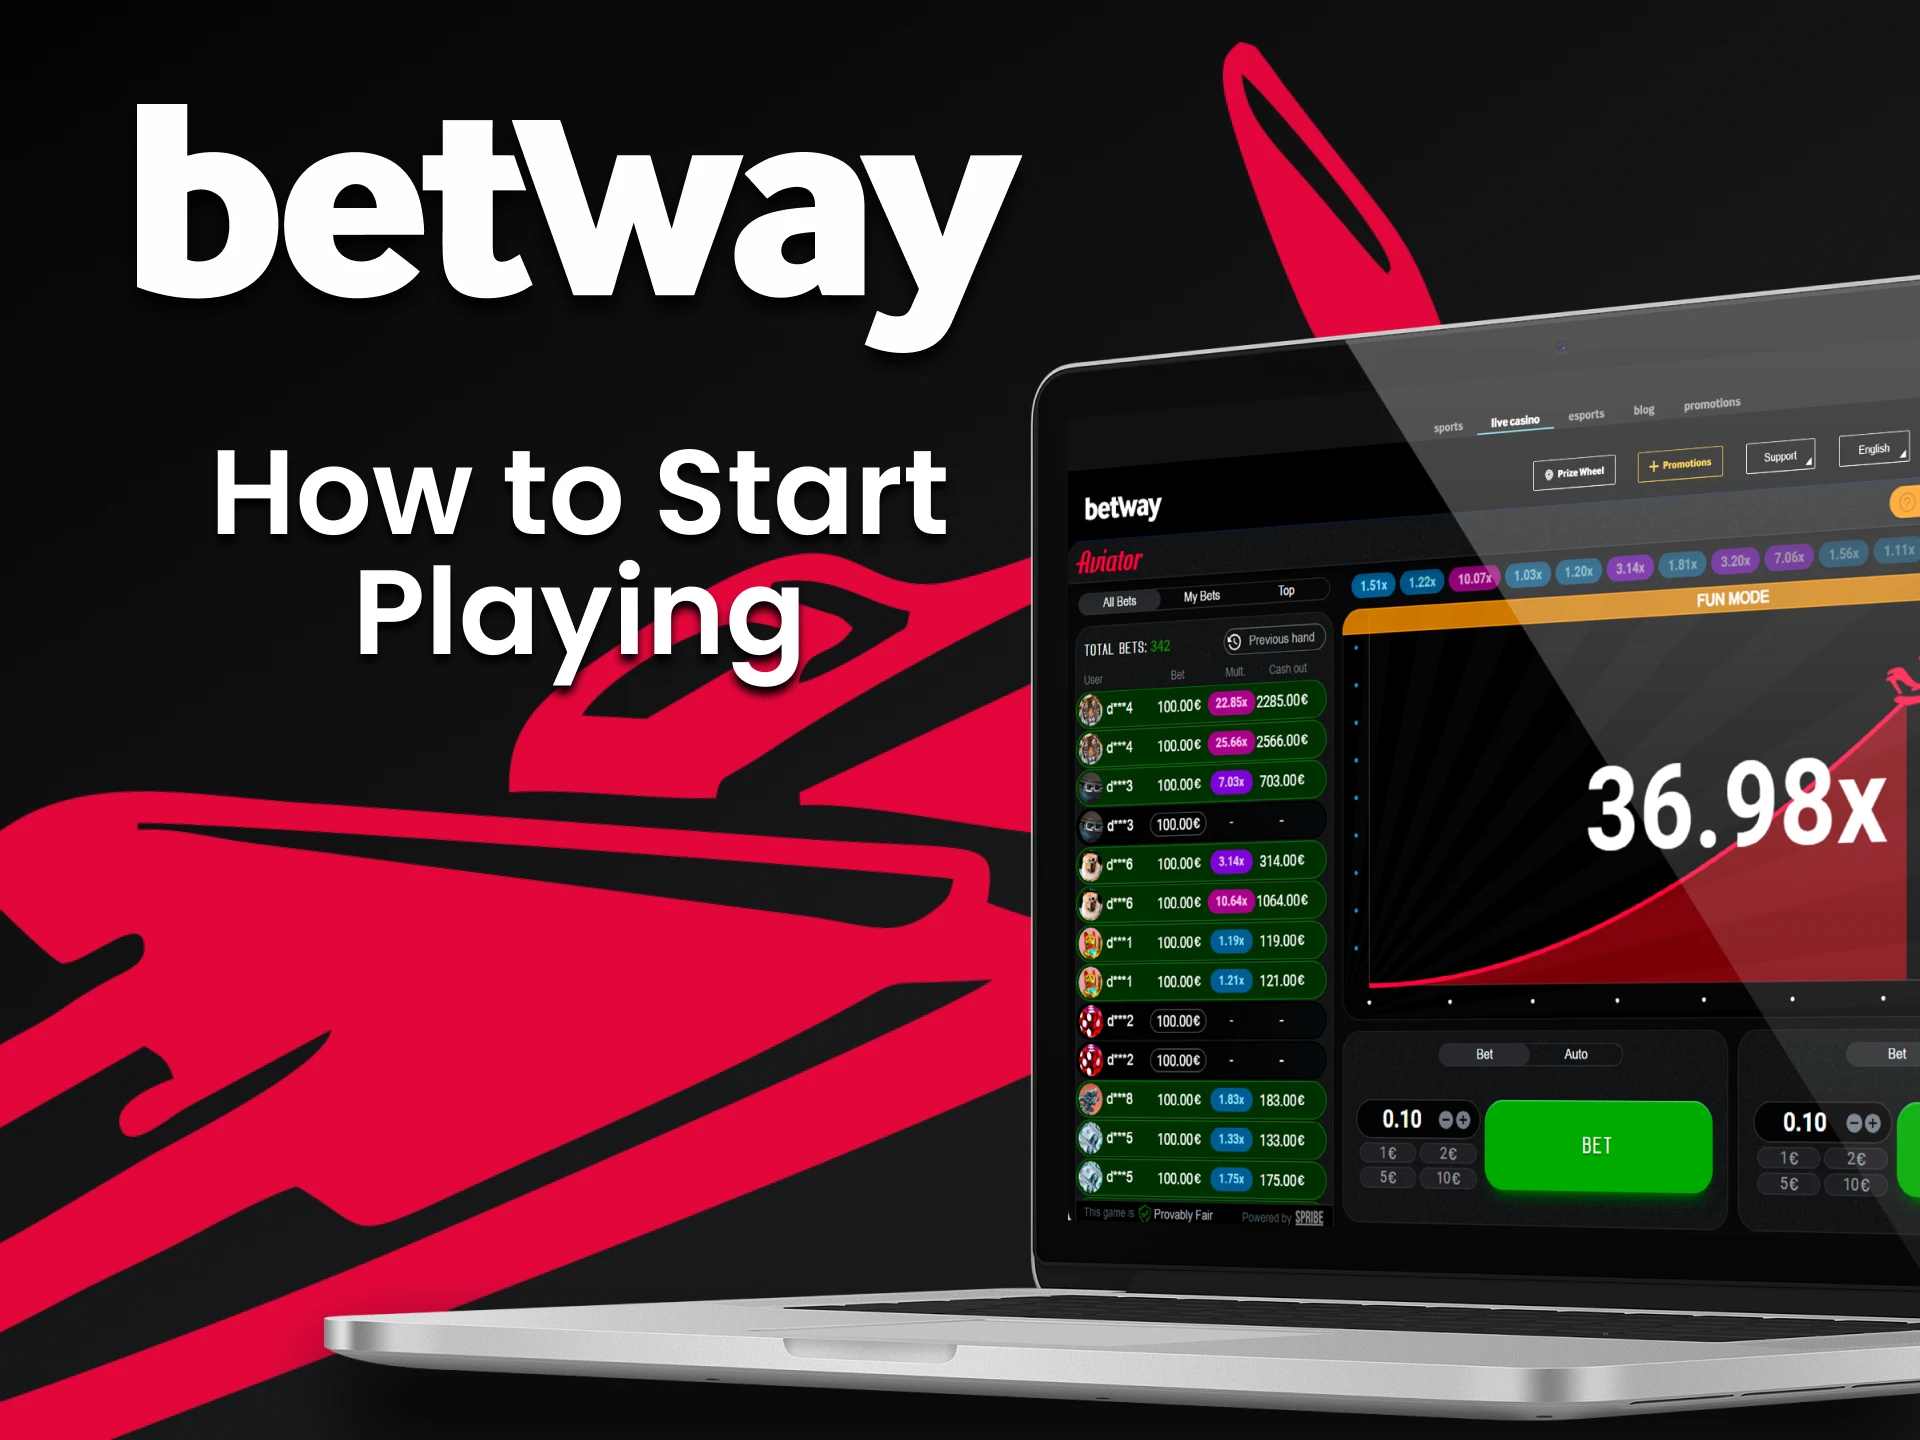 Go to Betway and start playing Aviator.